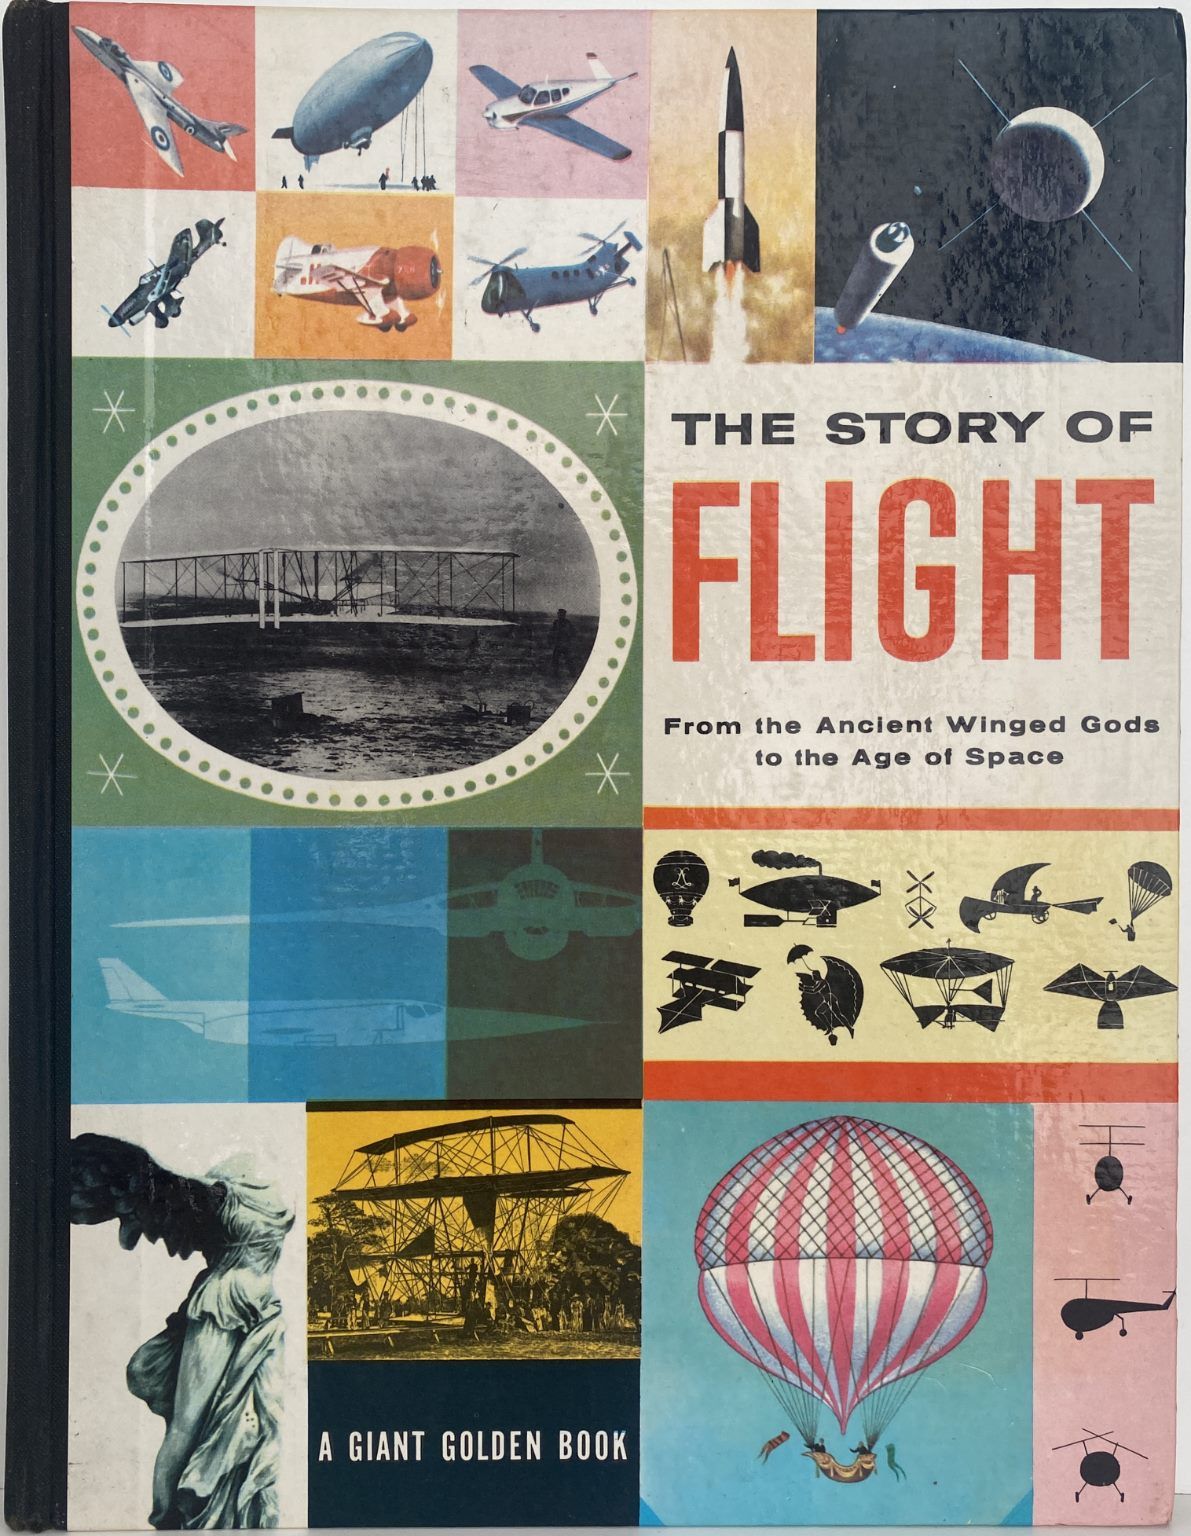 THE STORY OF FLIGHT: From the Ancient Winged Gods to the Age of Space